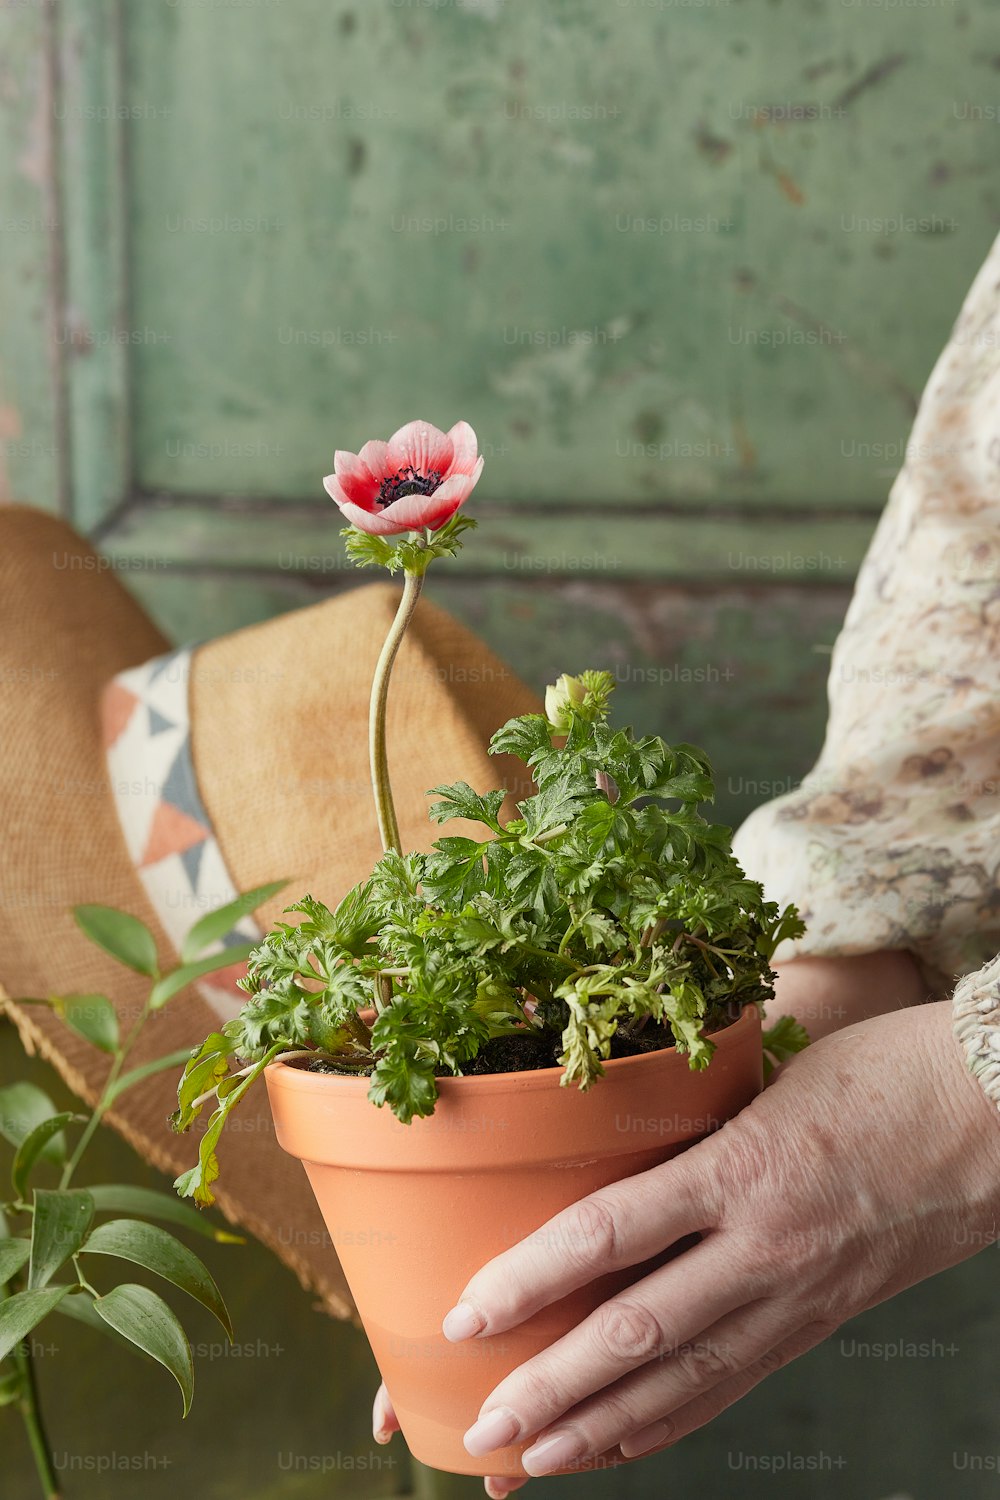 a person holding a potted plant with a flower in it